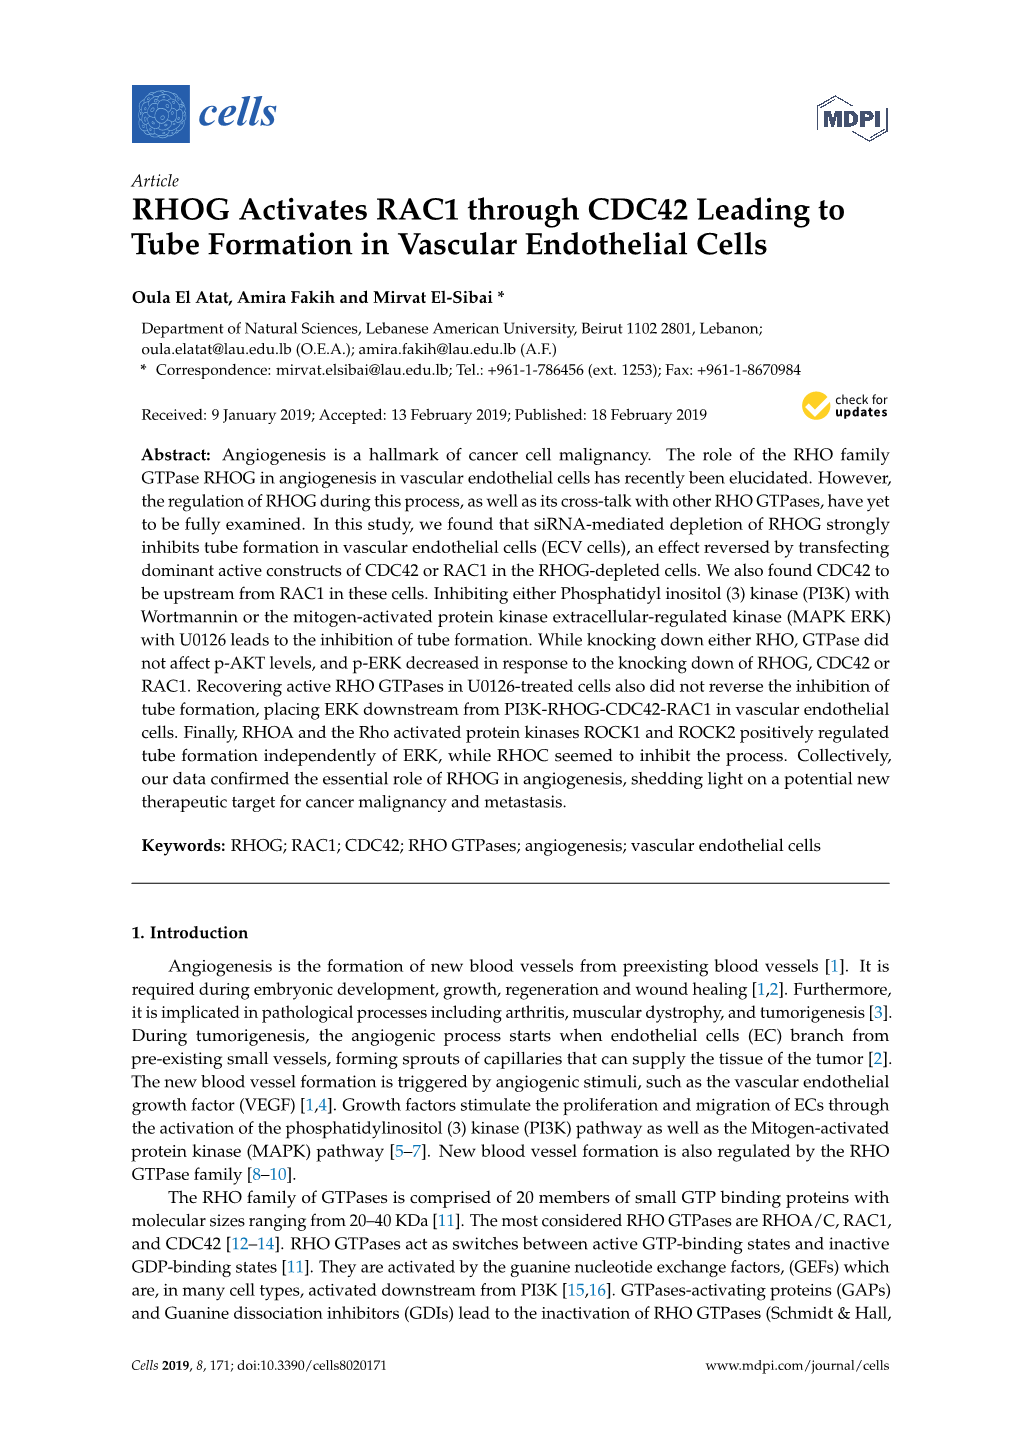 RHOG Activates RAC1 Through CDC42 Leading to Tube Formation in Vascular Endothelial Cells